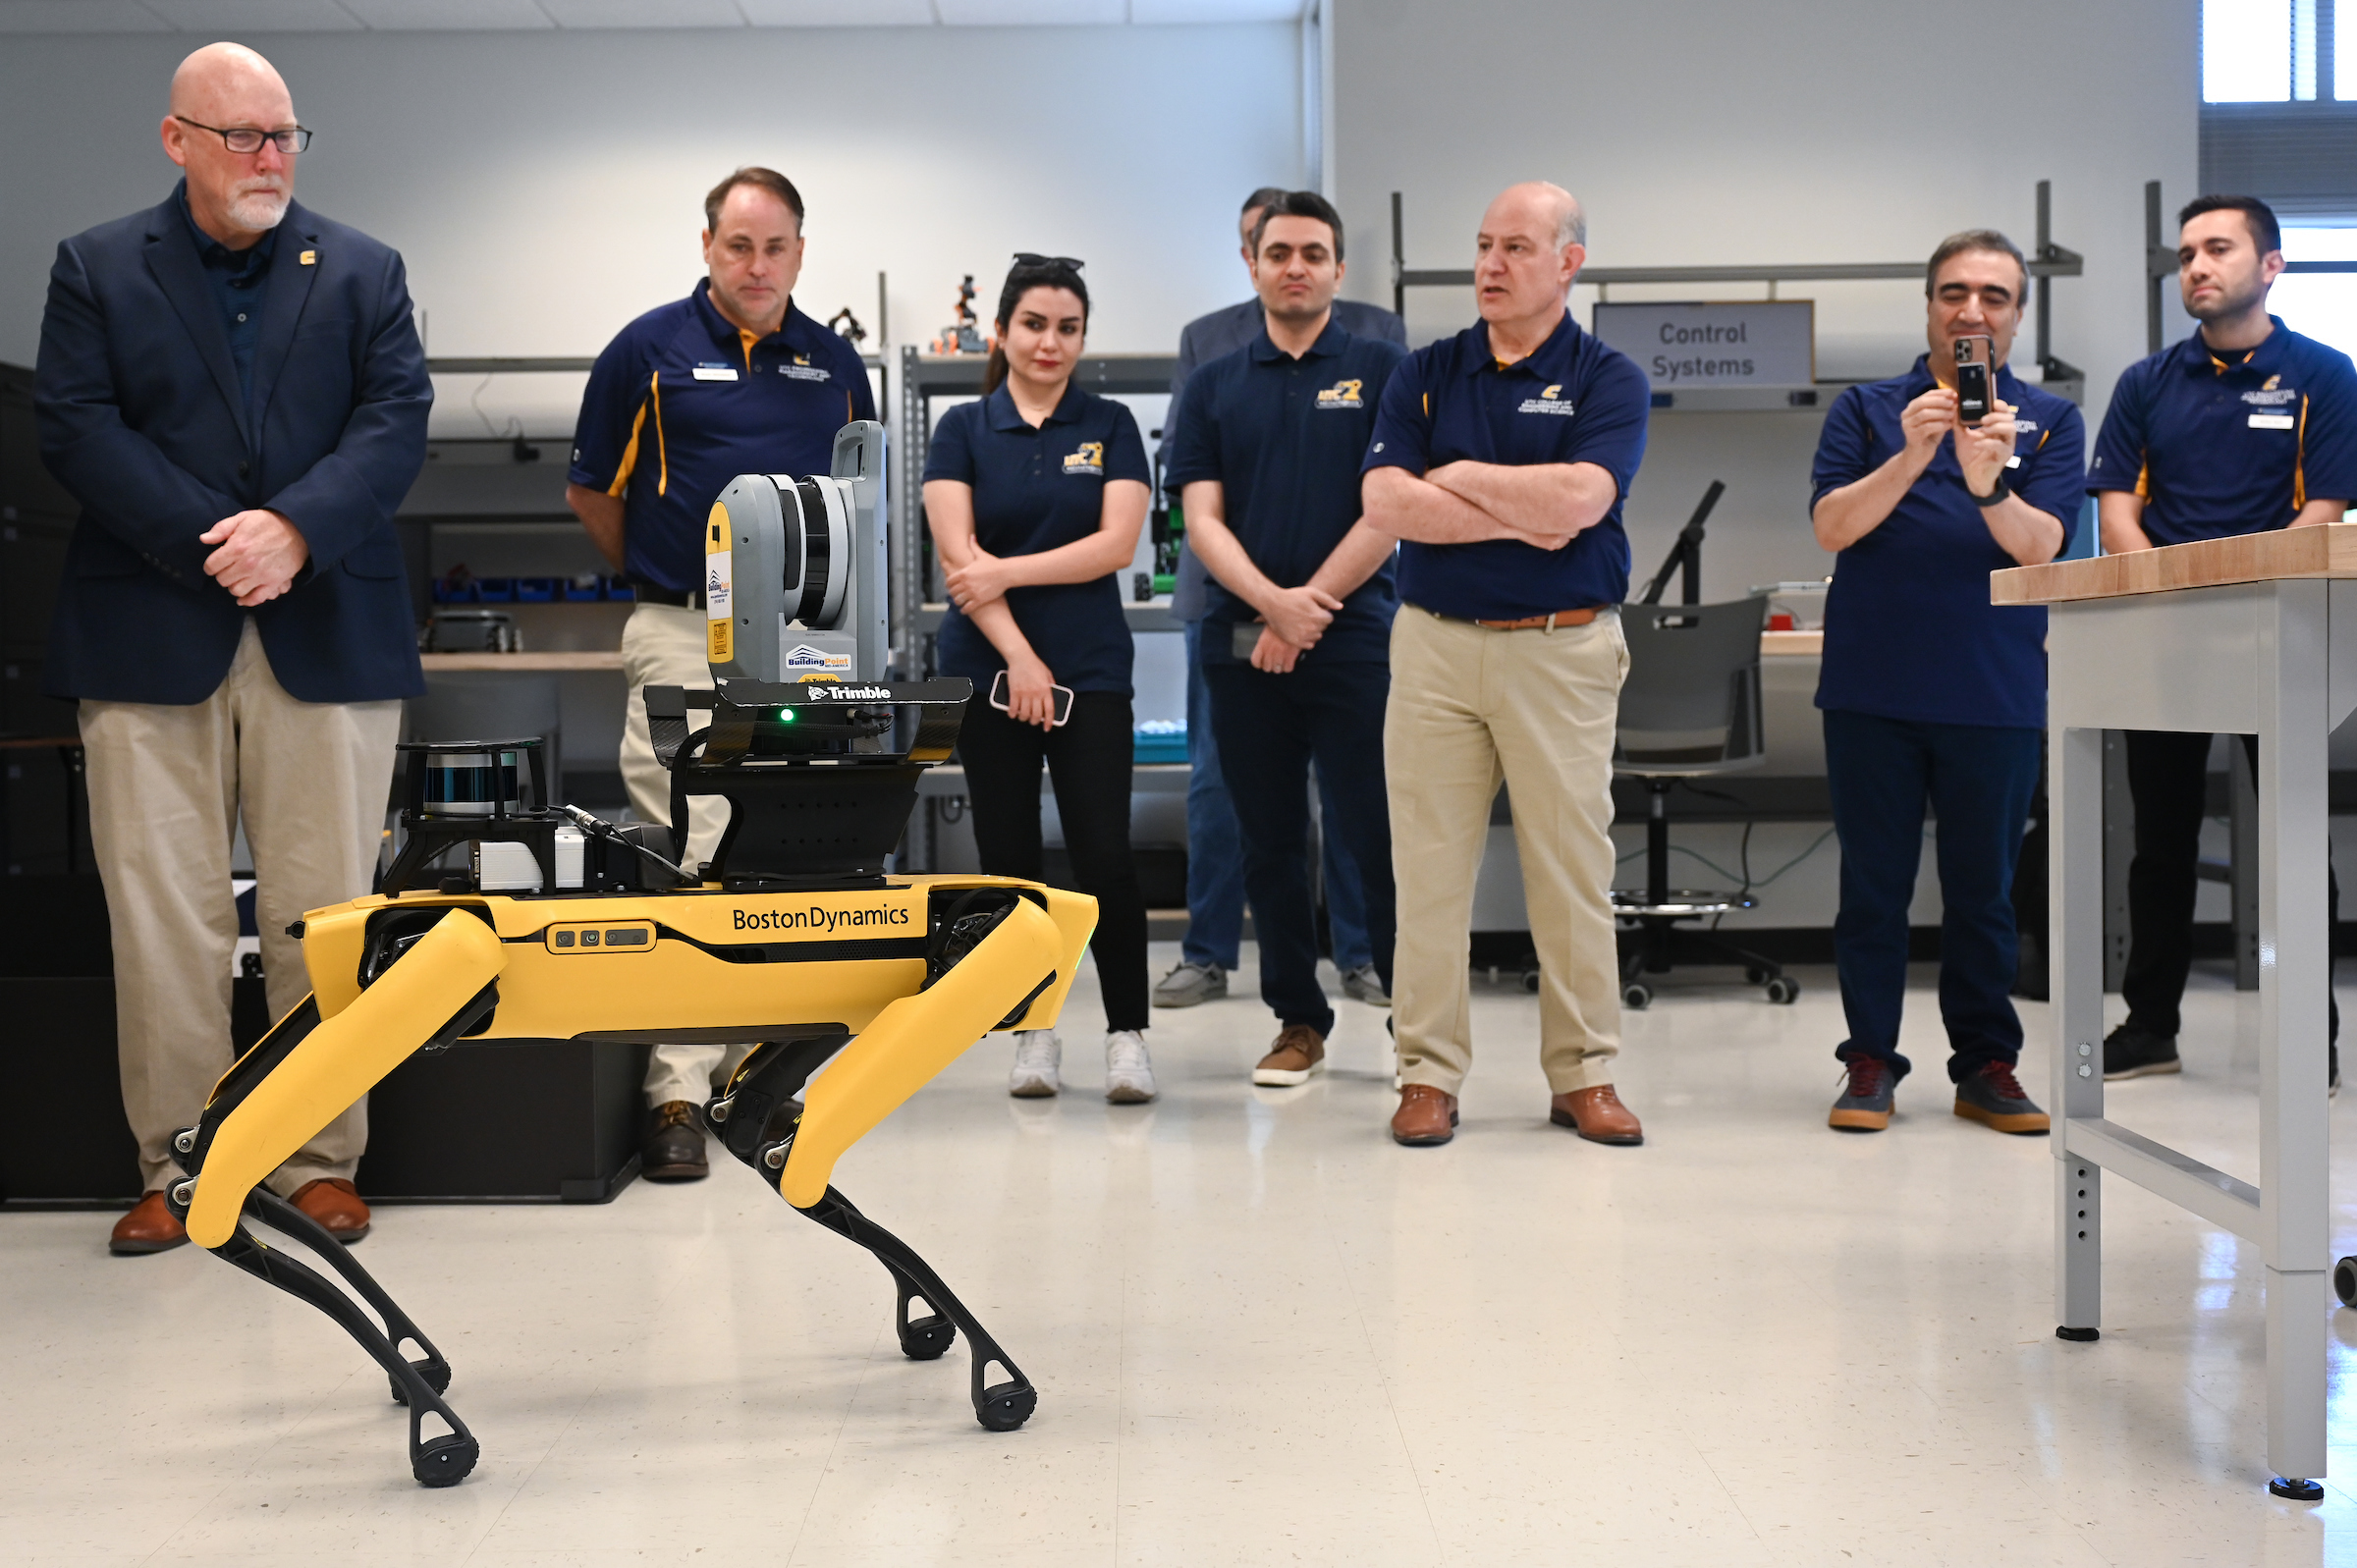 The grand opening of the Robotics, Intelligent Systems and Control Lab took place on Thursday, May 4. Photo by Angela Foster.